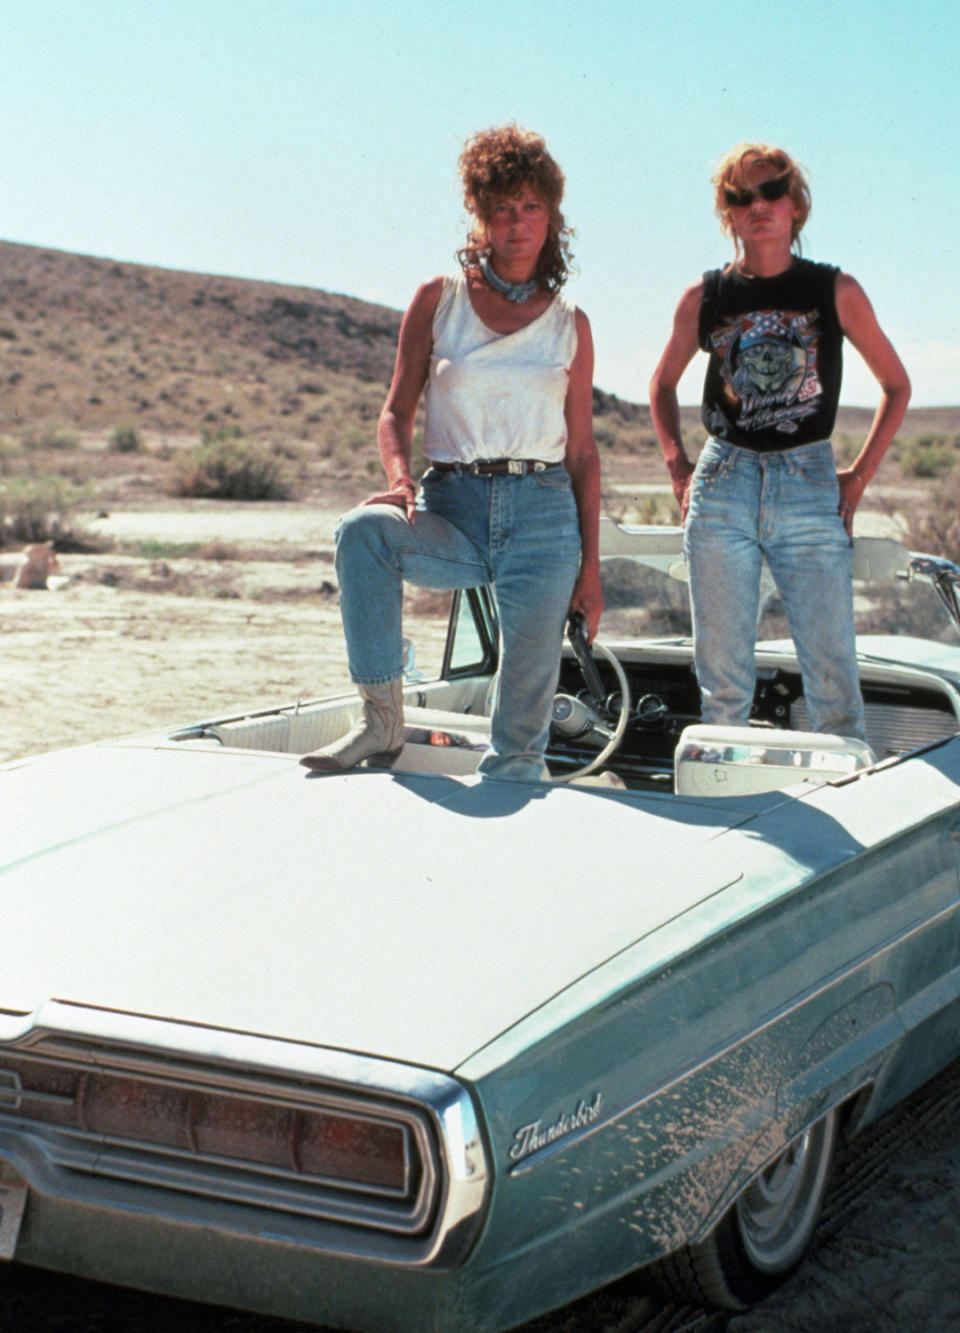 Thelma and Louise in Thelma and Louise